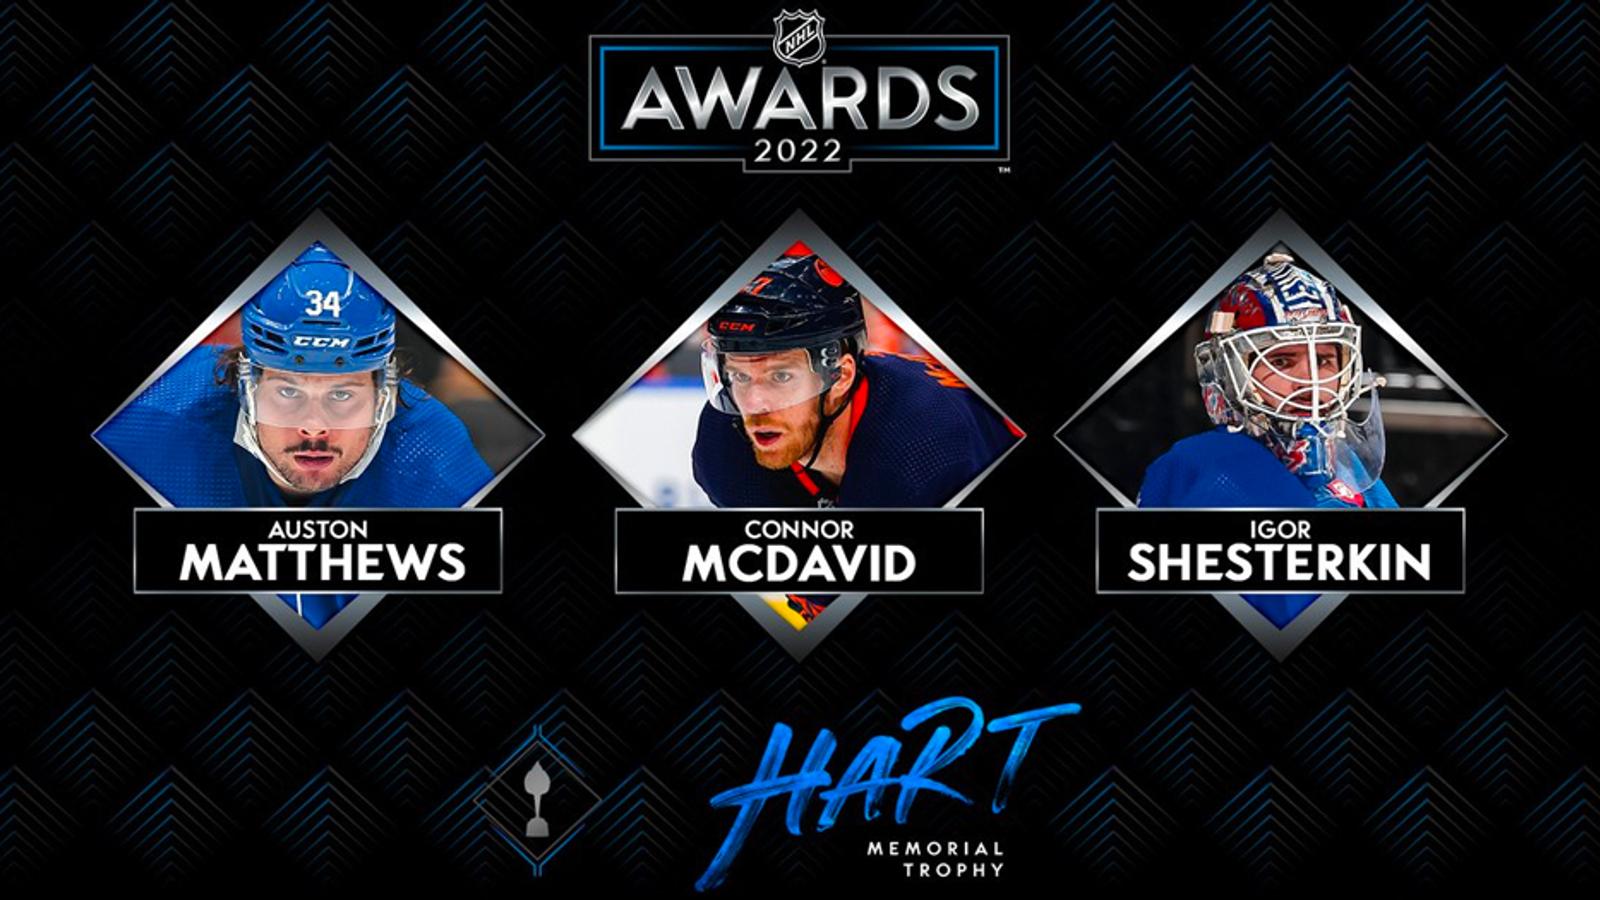 McDavid, Matthews and Shesterkin nominated for Hart Trophy